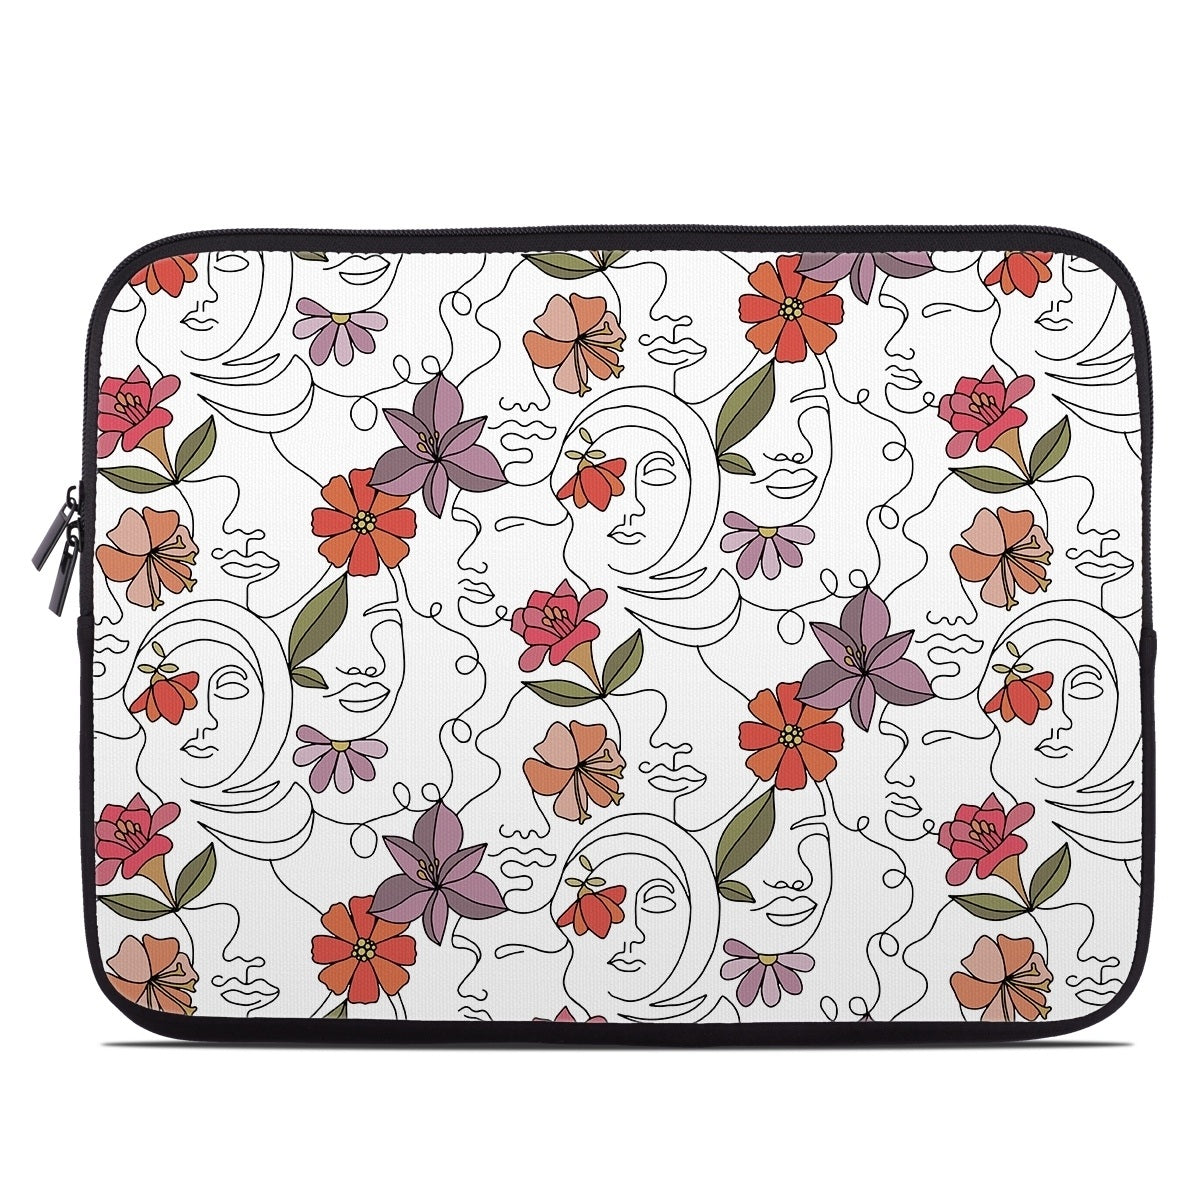 Growing Together - Laptop Sleeve